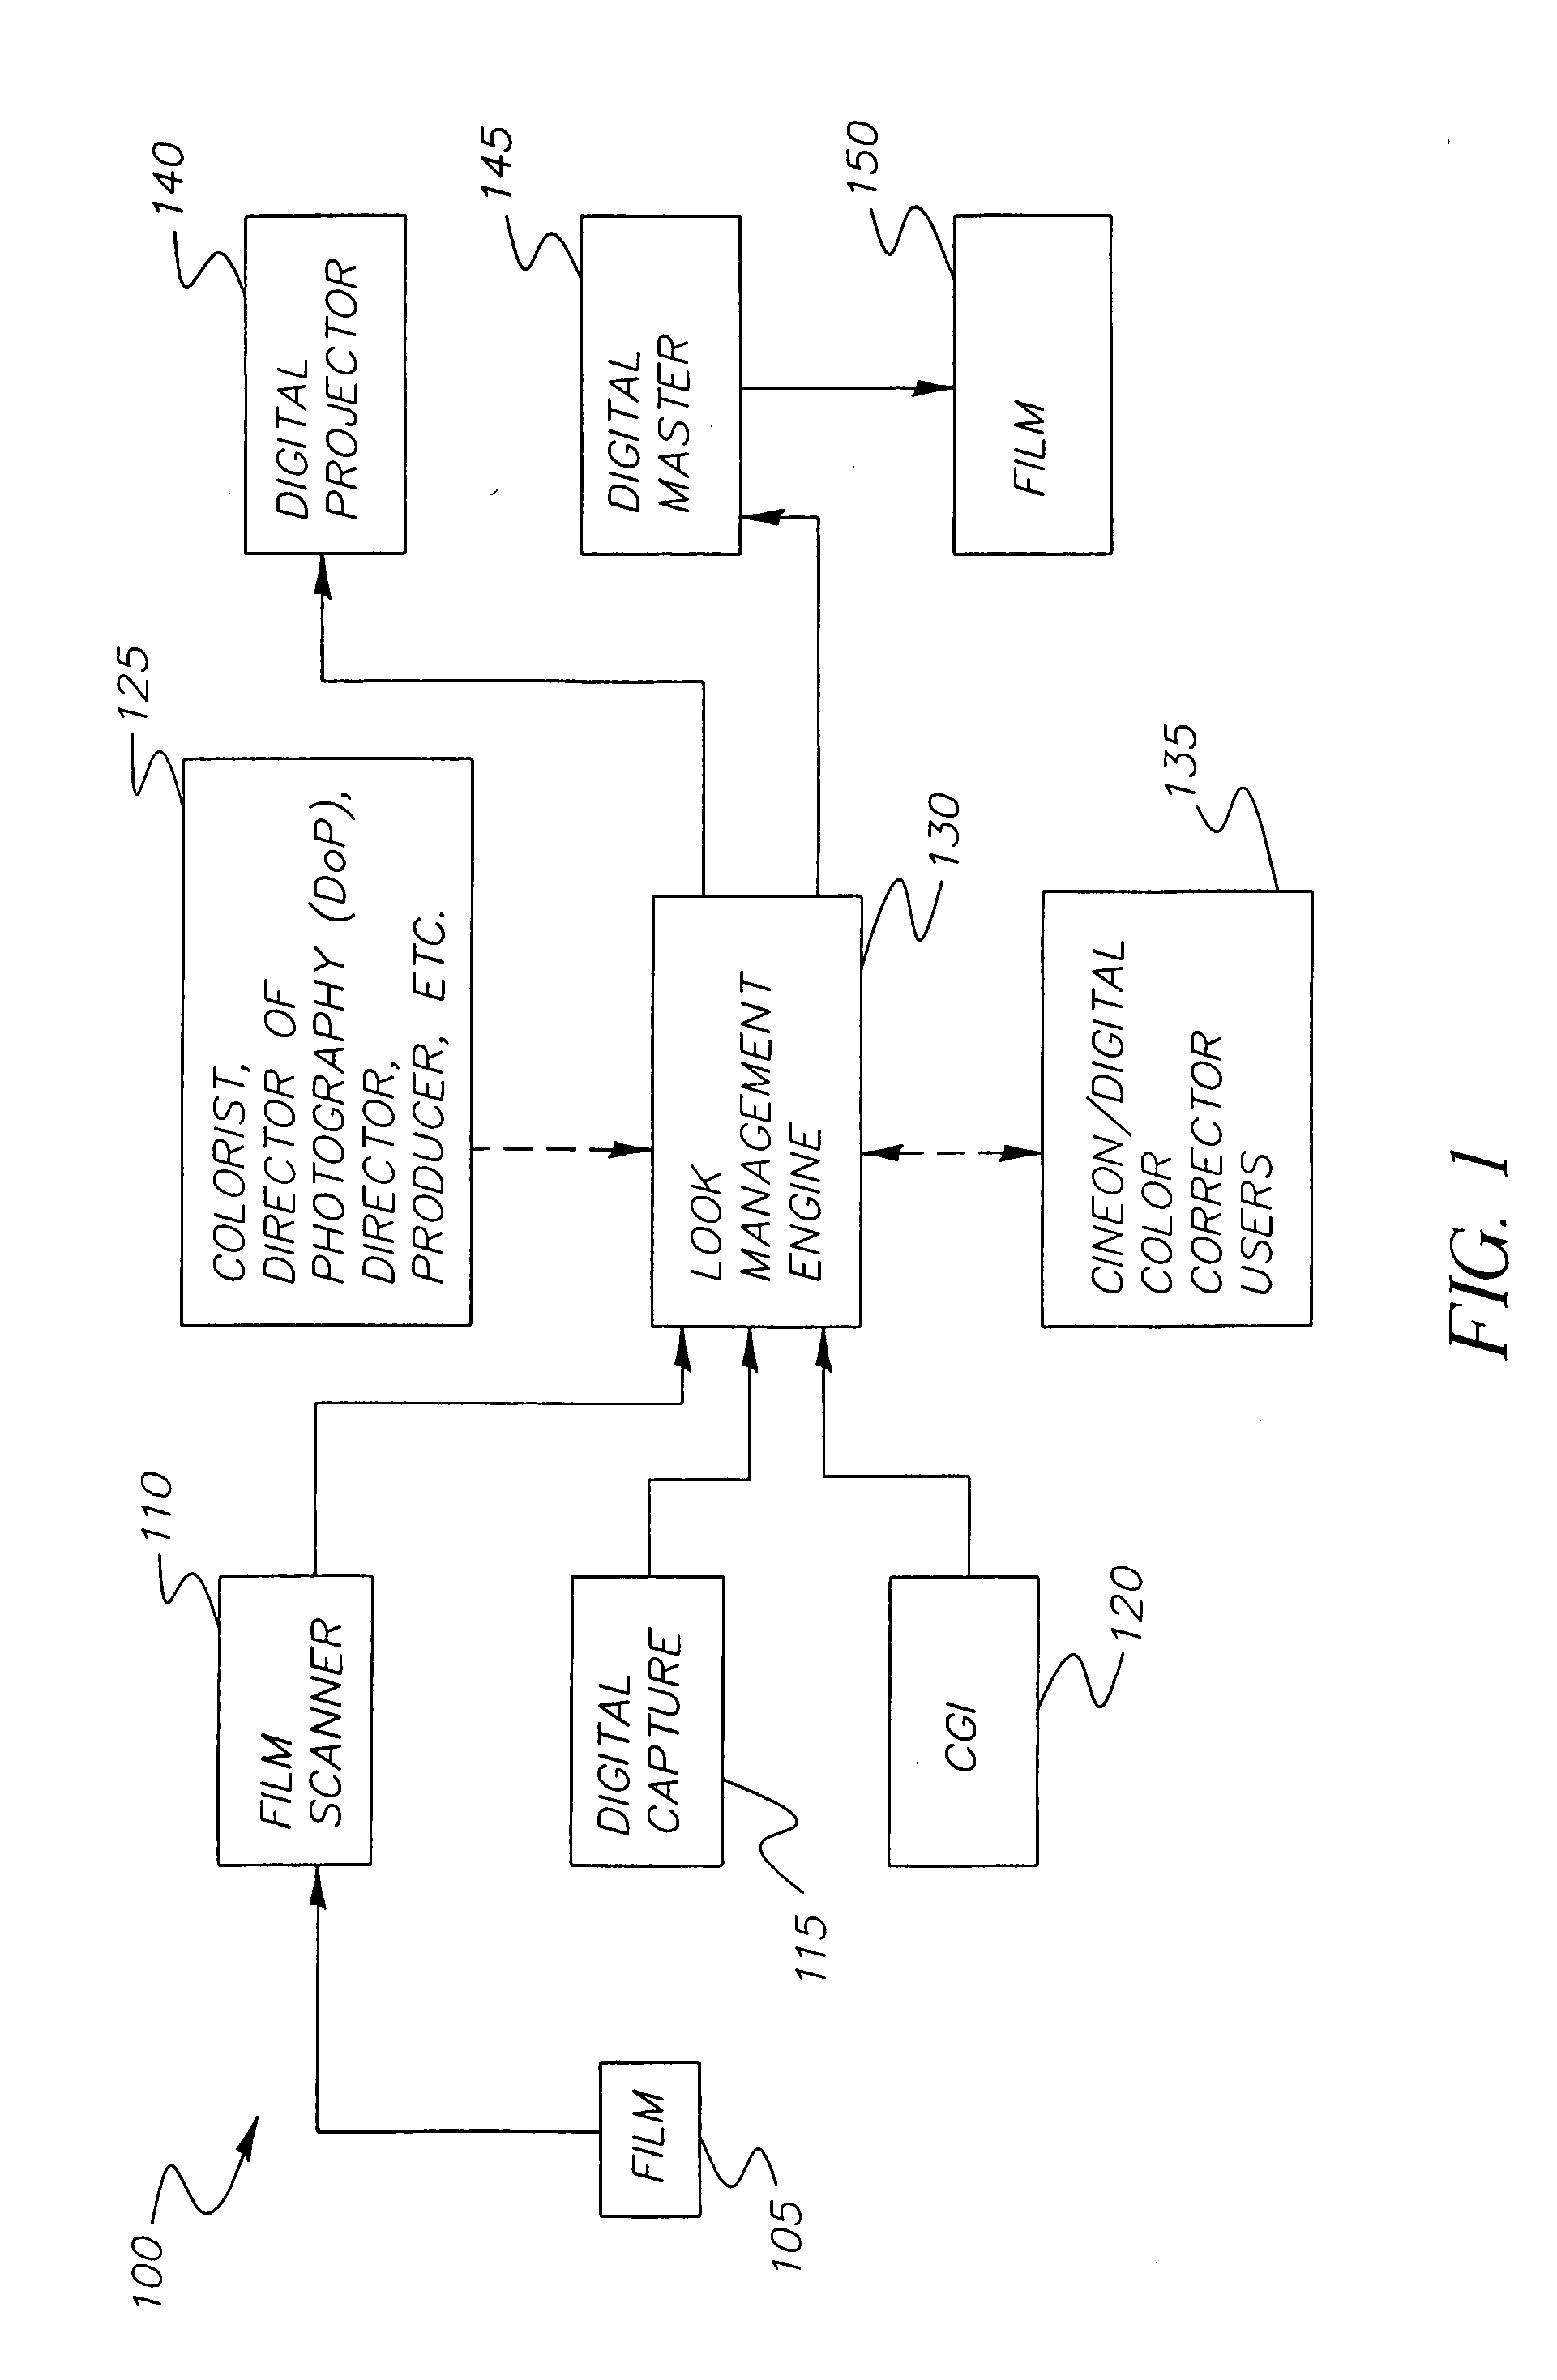 Method and system for preserving the creative intent within a motion picture production chain